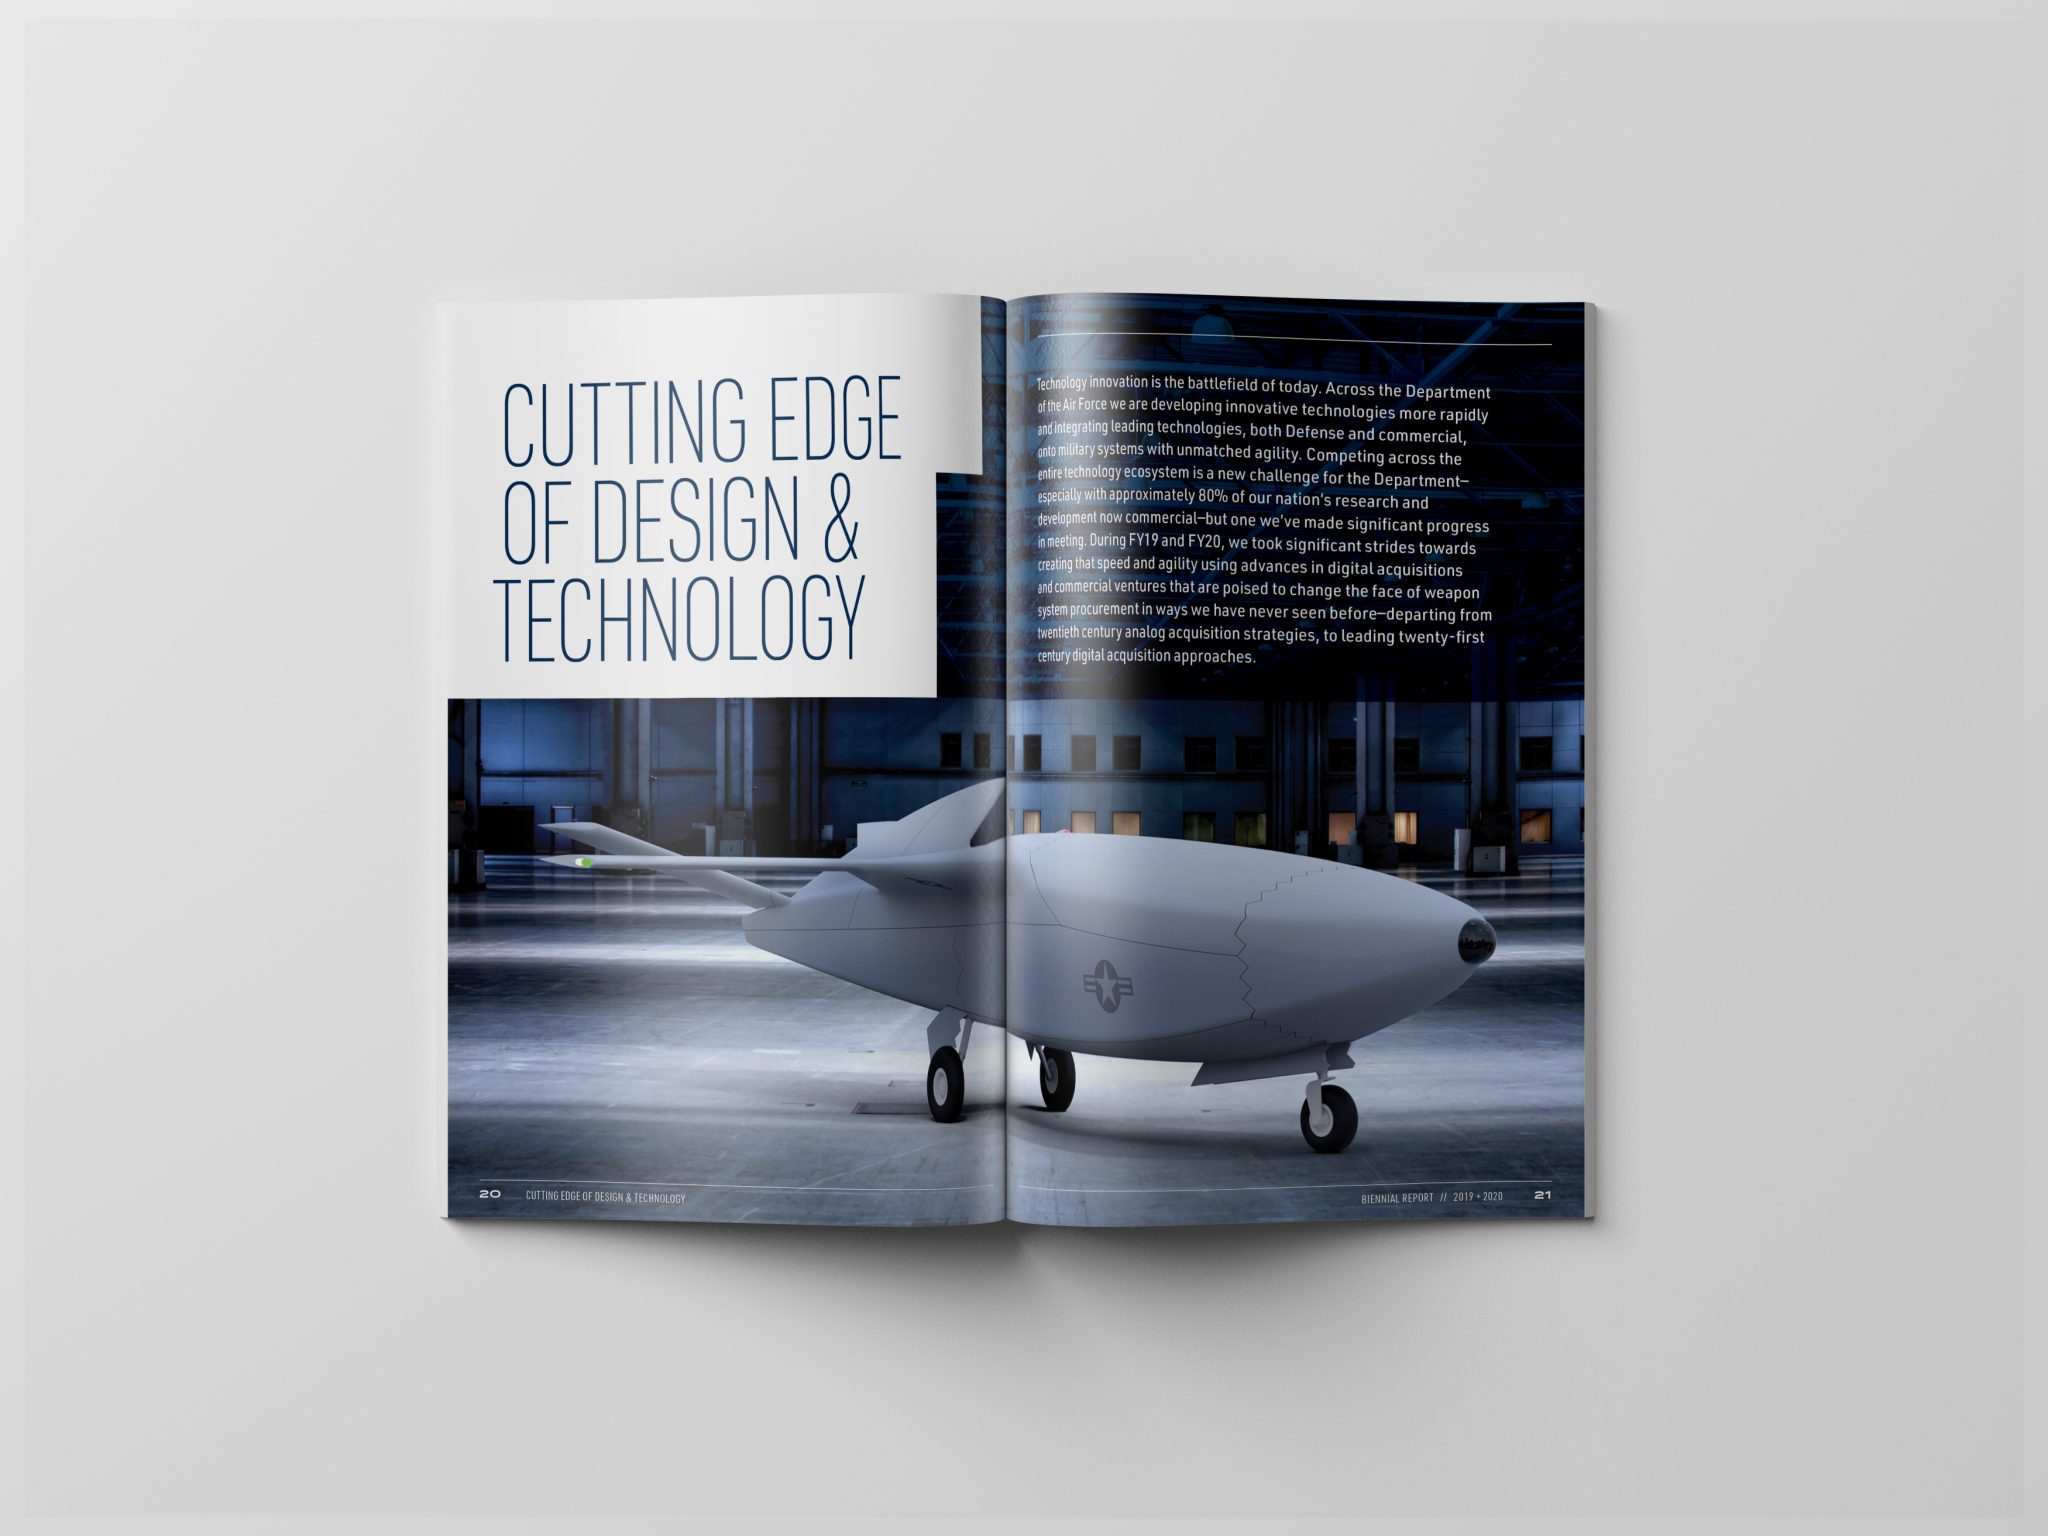 Department of the Air Force Acquisition Biennial Report, designed by A+S Ideas Studio